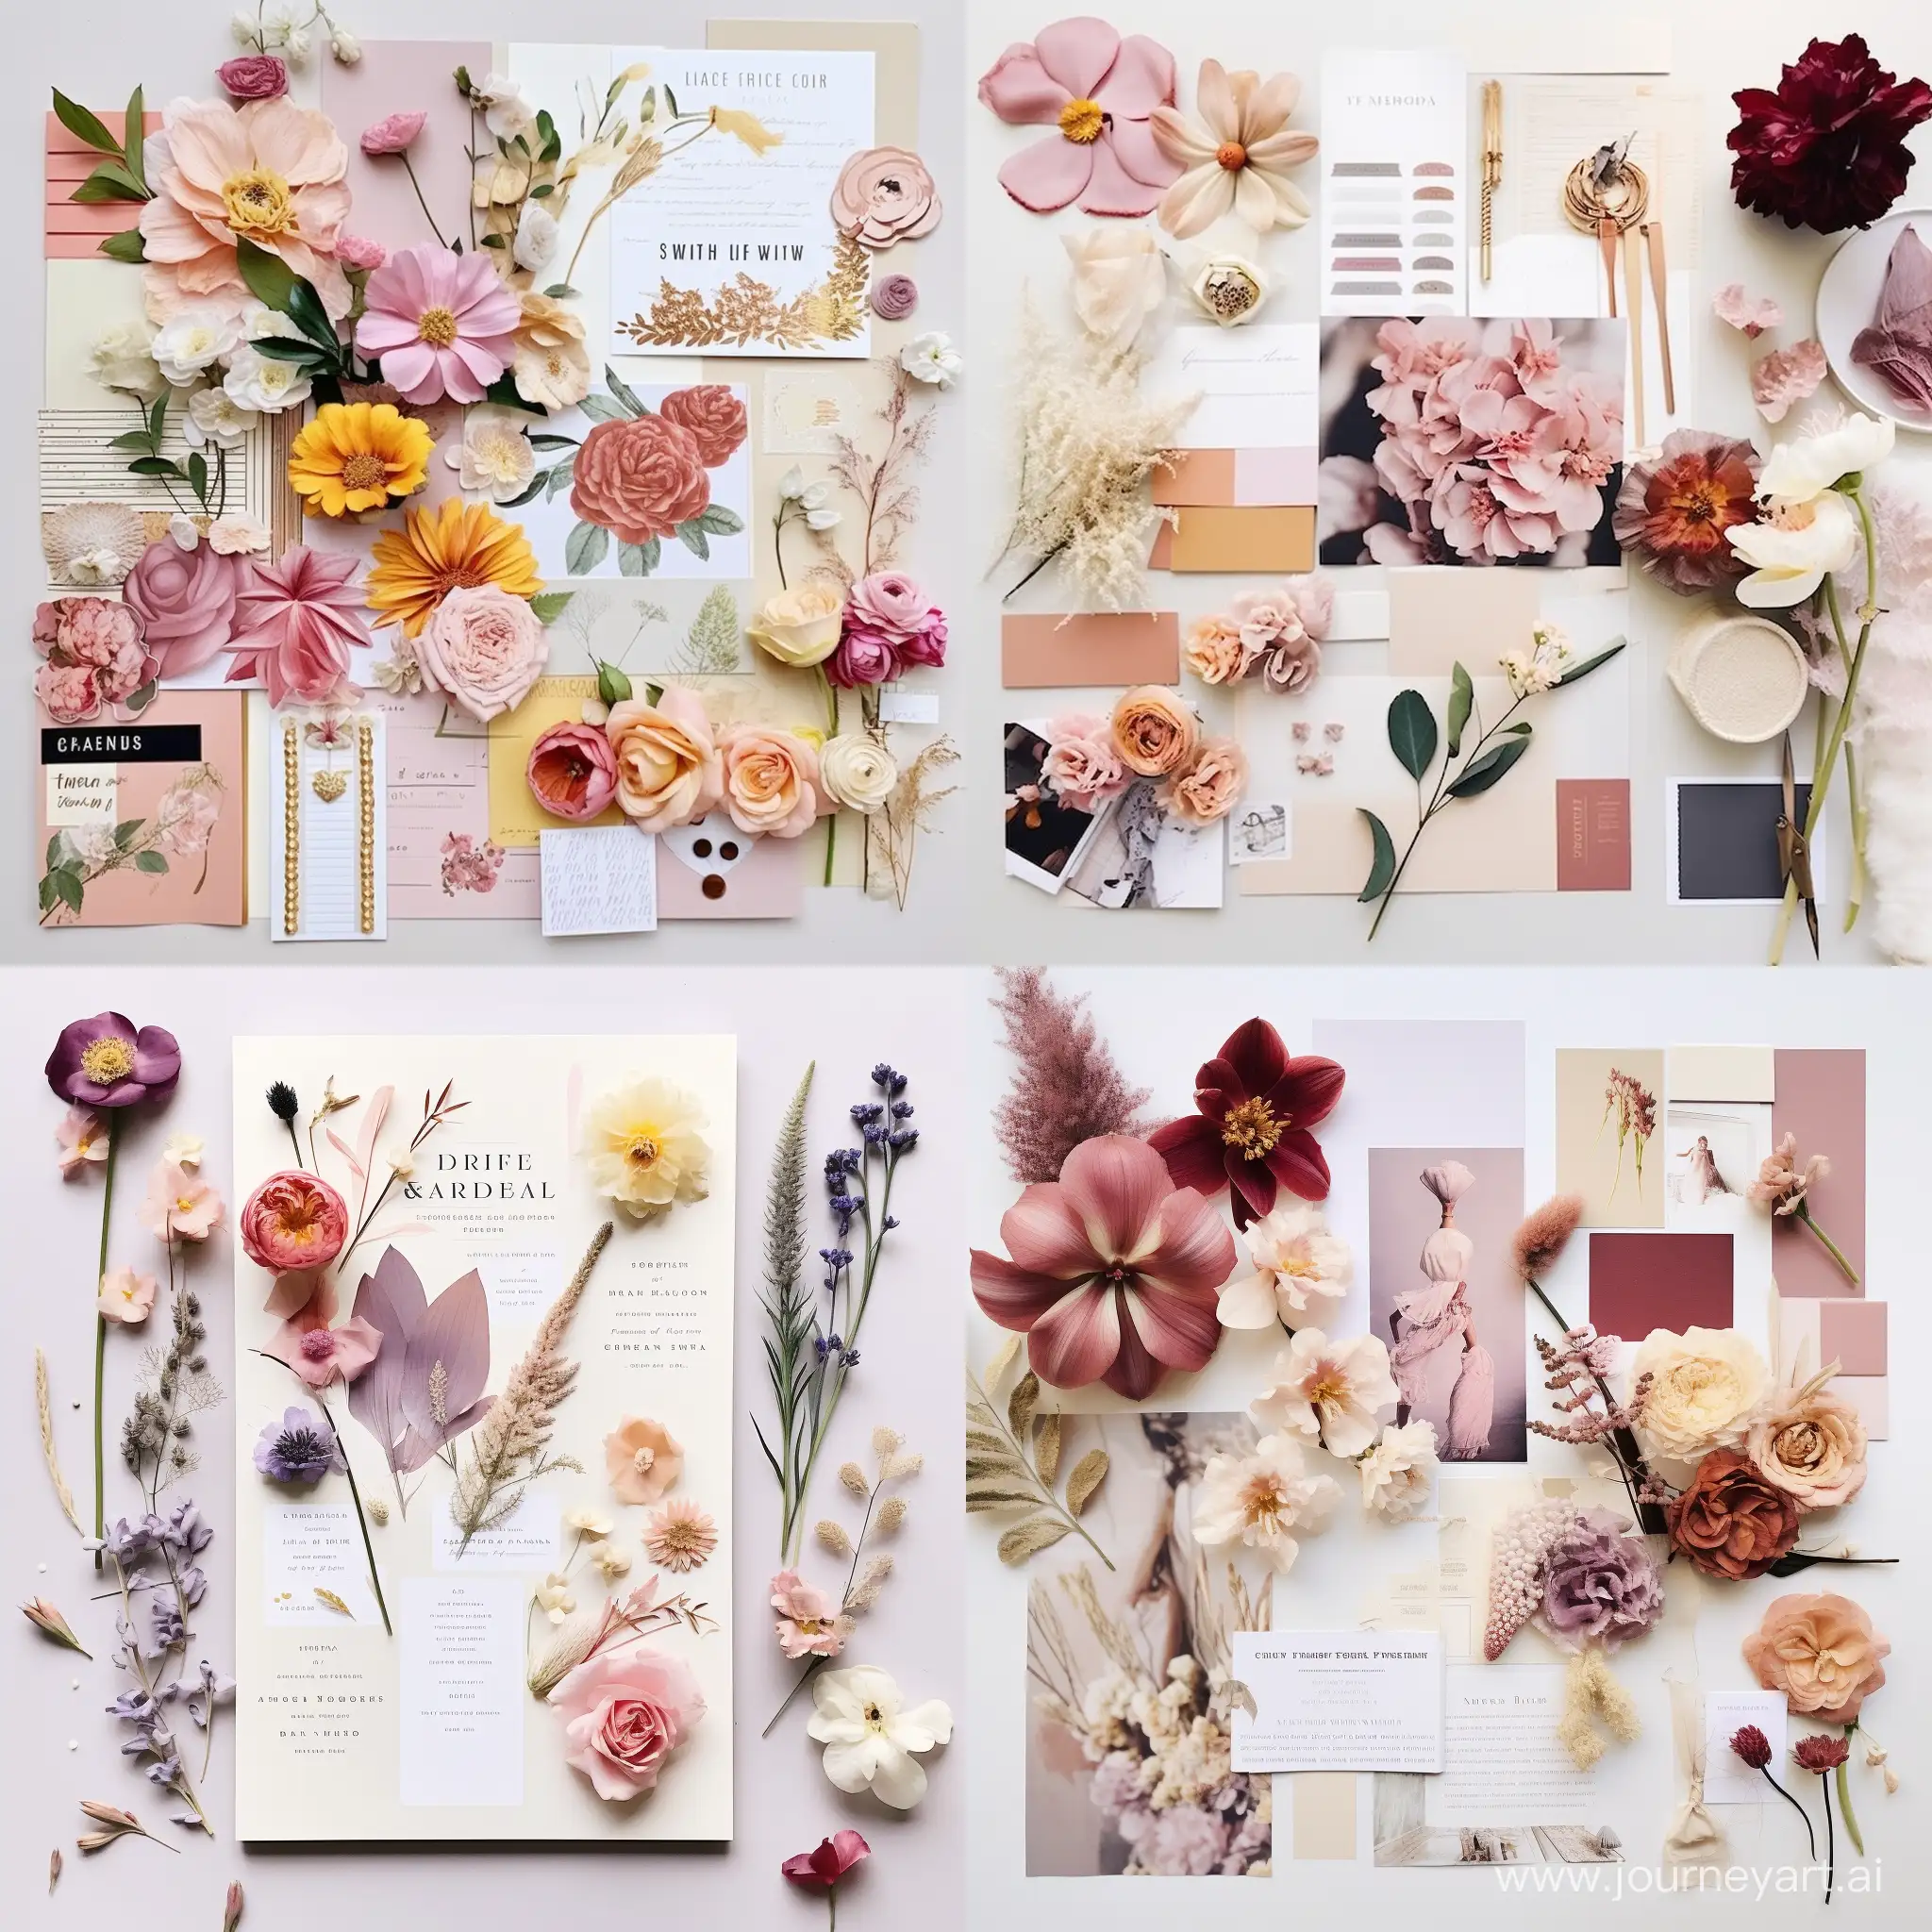 Floral-Harmony-Artful-Collage-of-Brand-Elements-Expressing-Unity